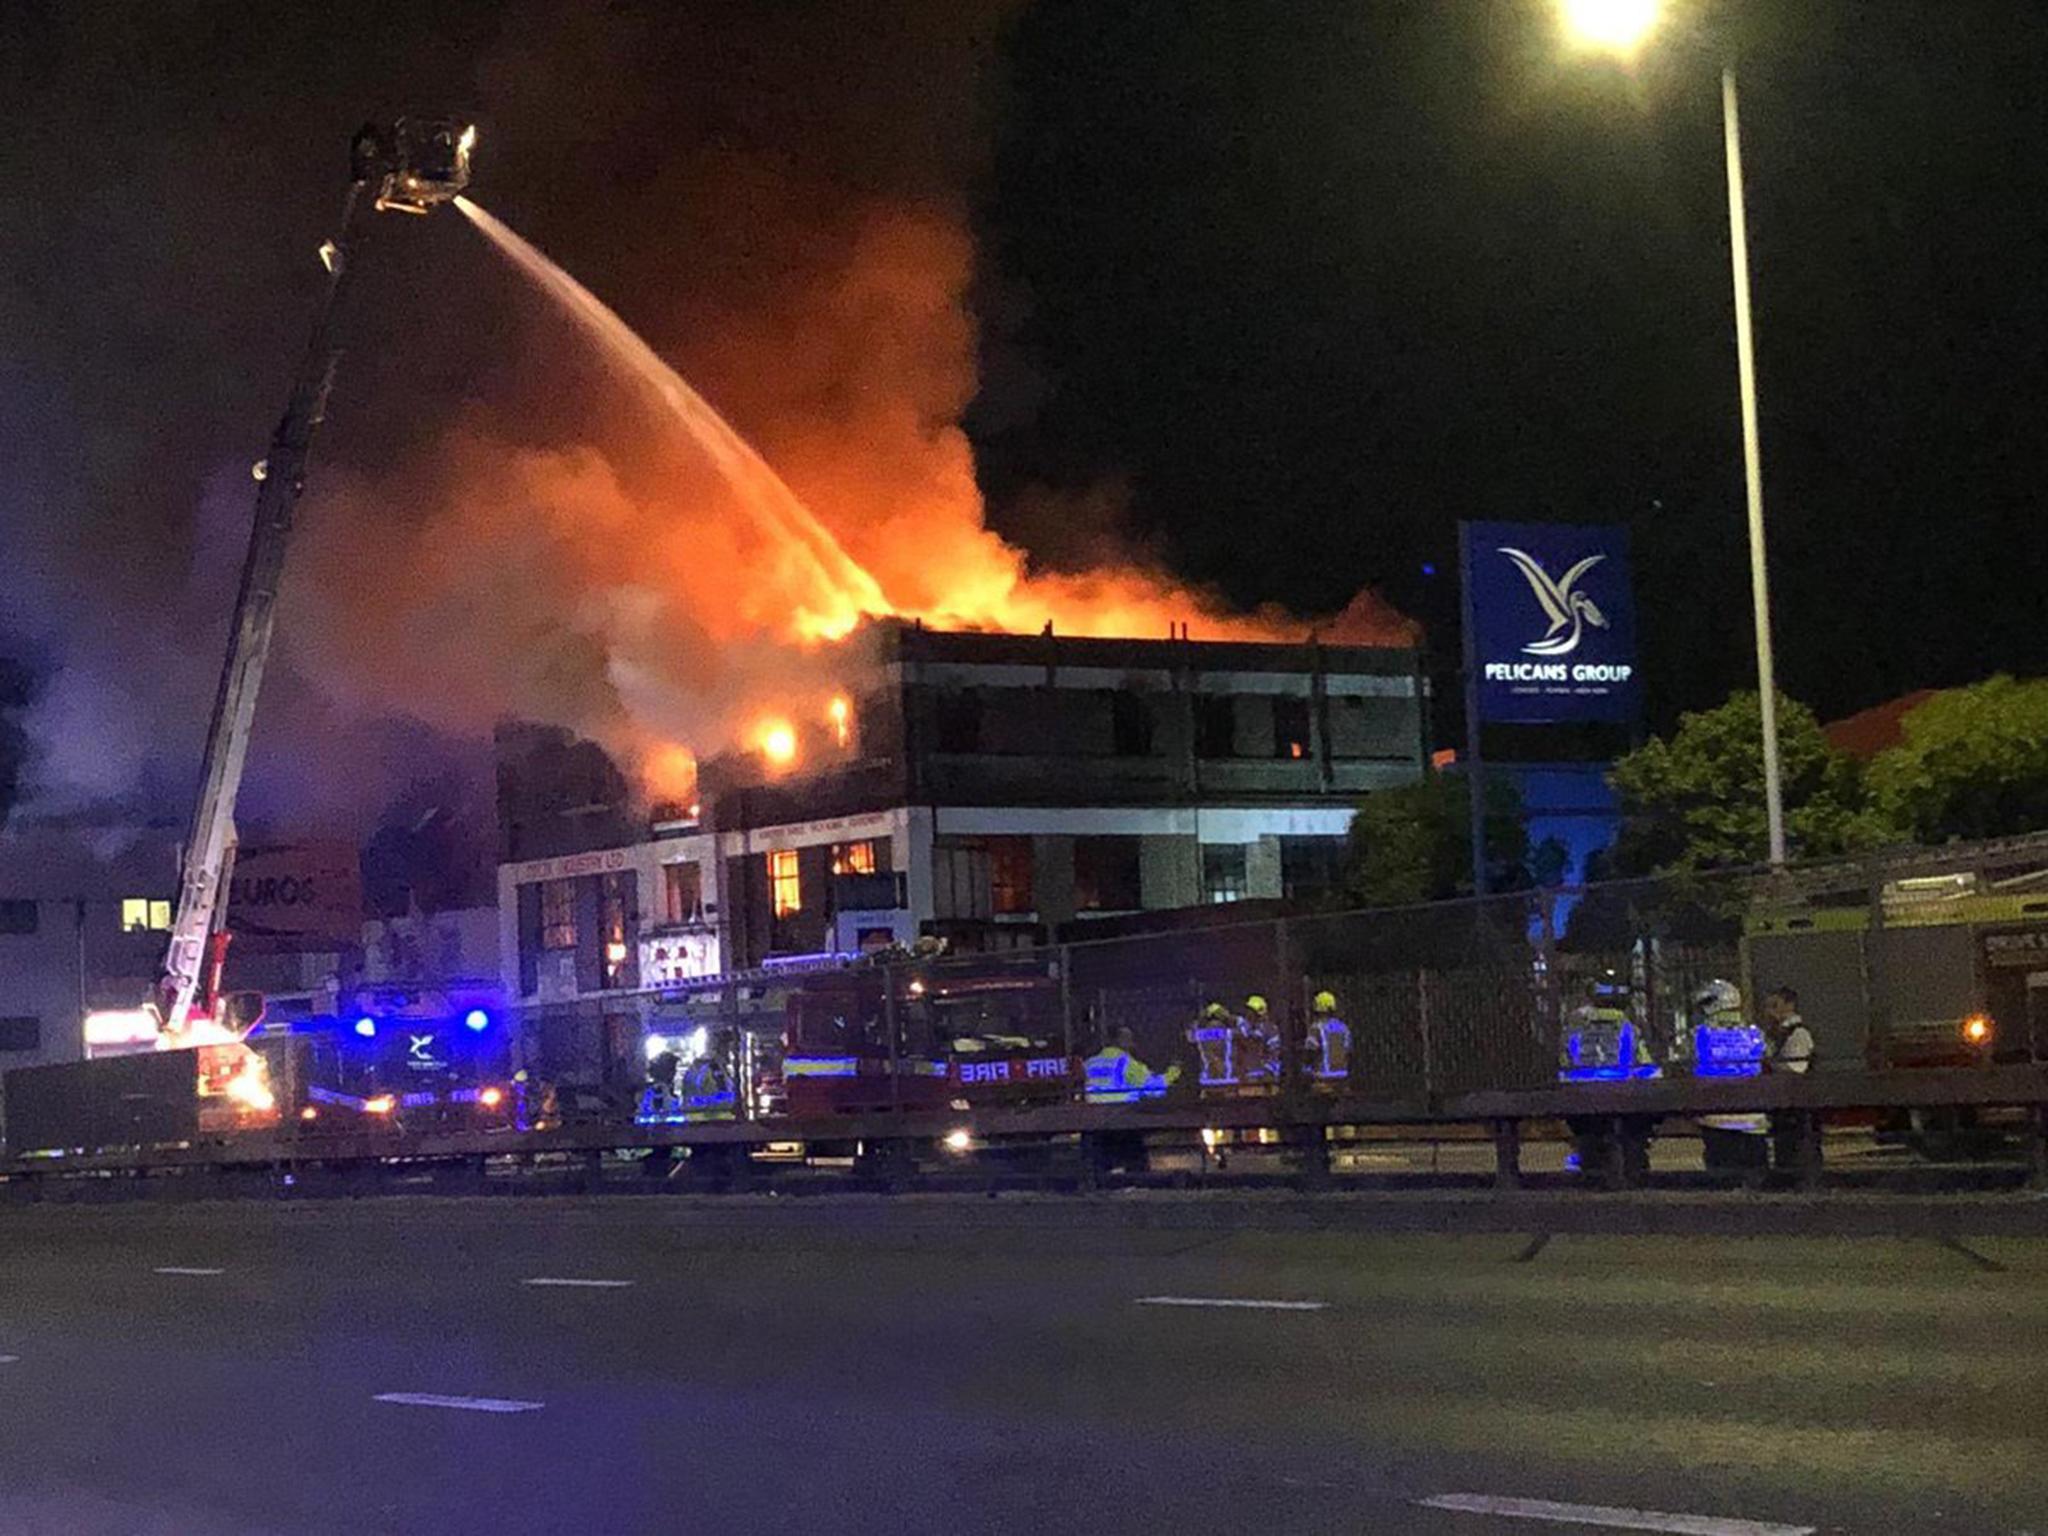 A406 traffic: London warehouse fire to cause severe rush-hour delays on North Circular